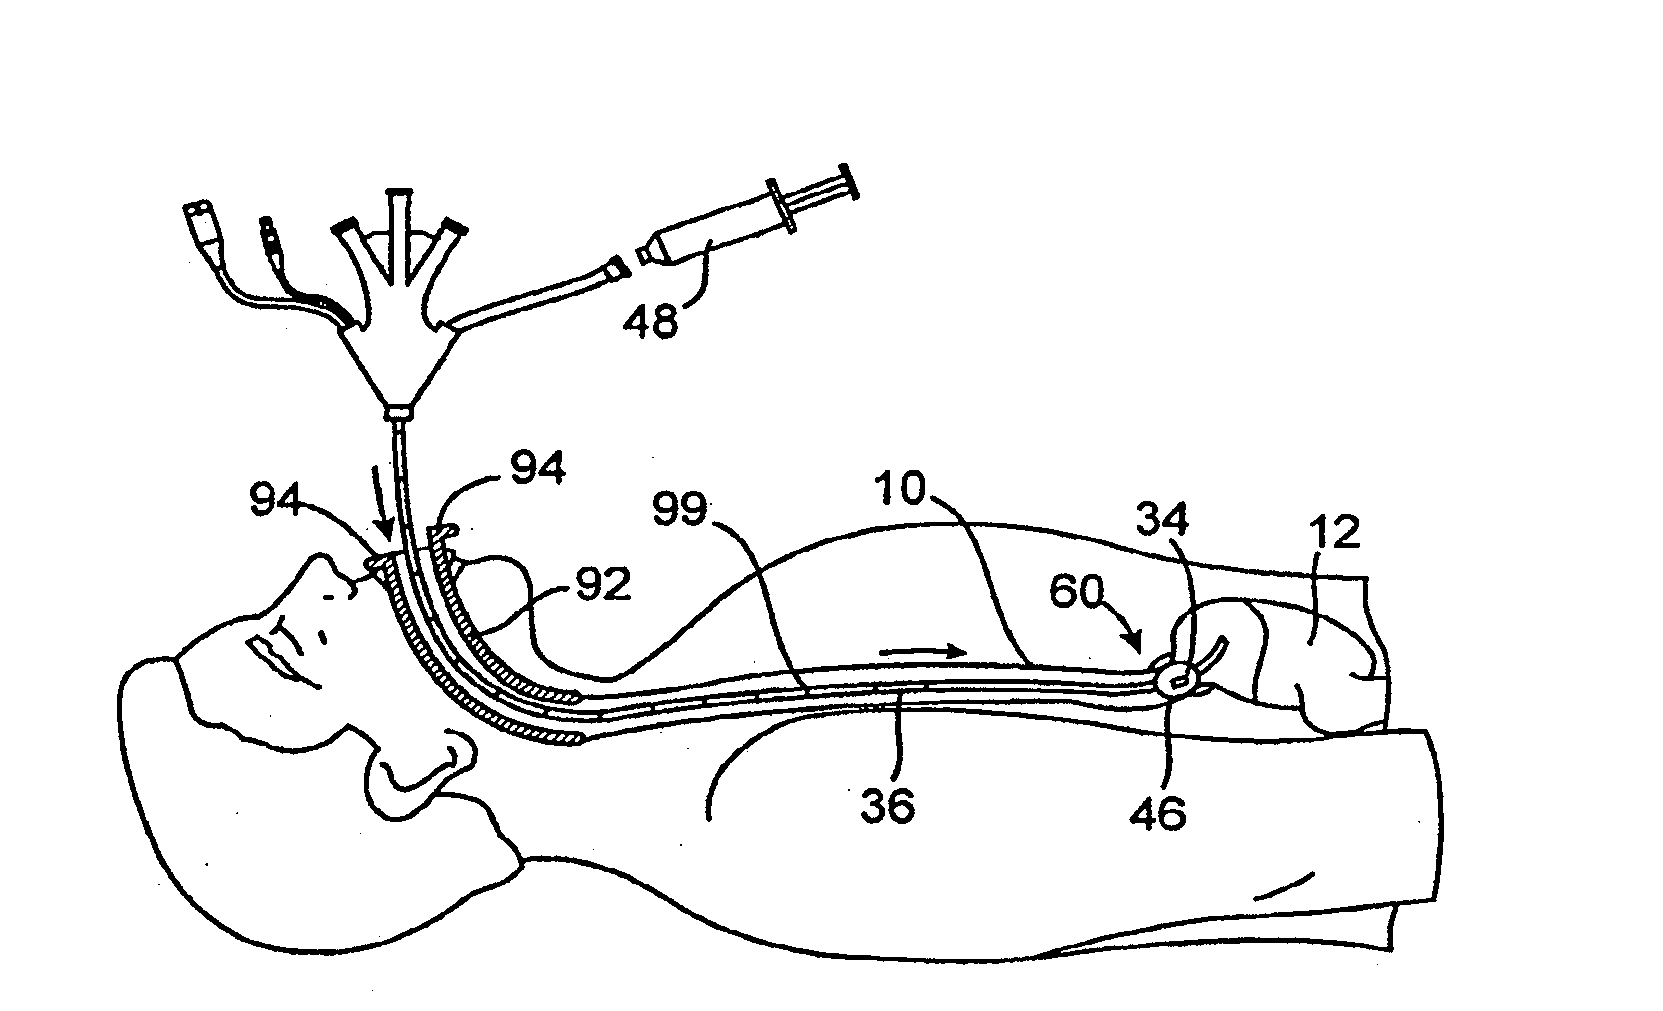 Method and apparatus employing ultrasound energy to treat body sphincters